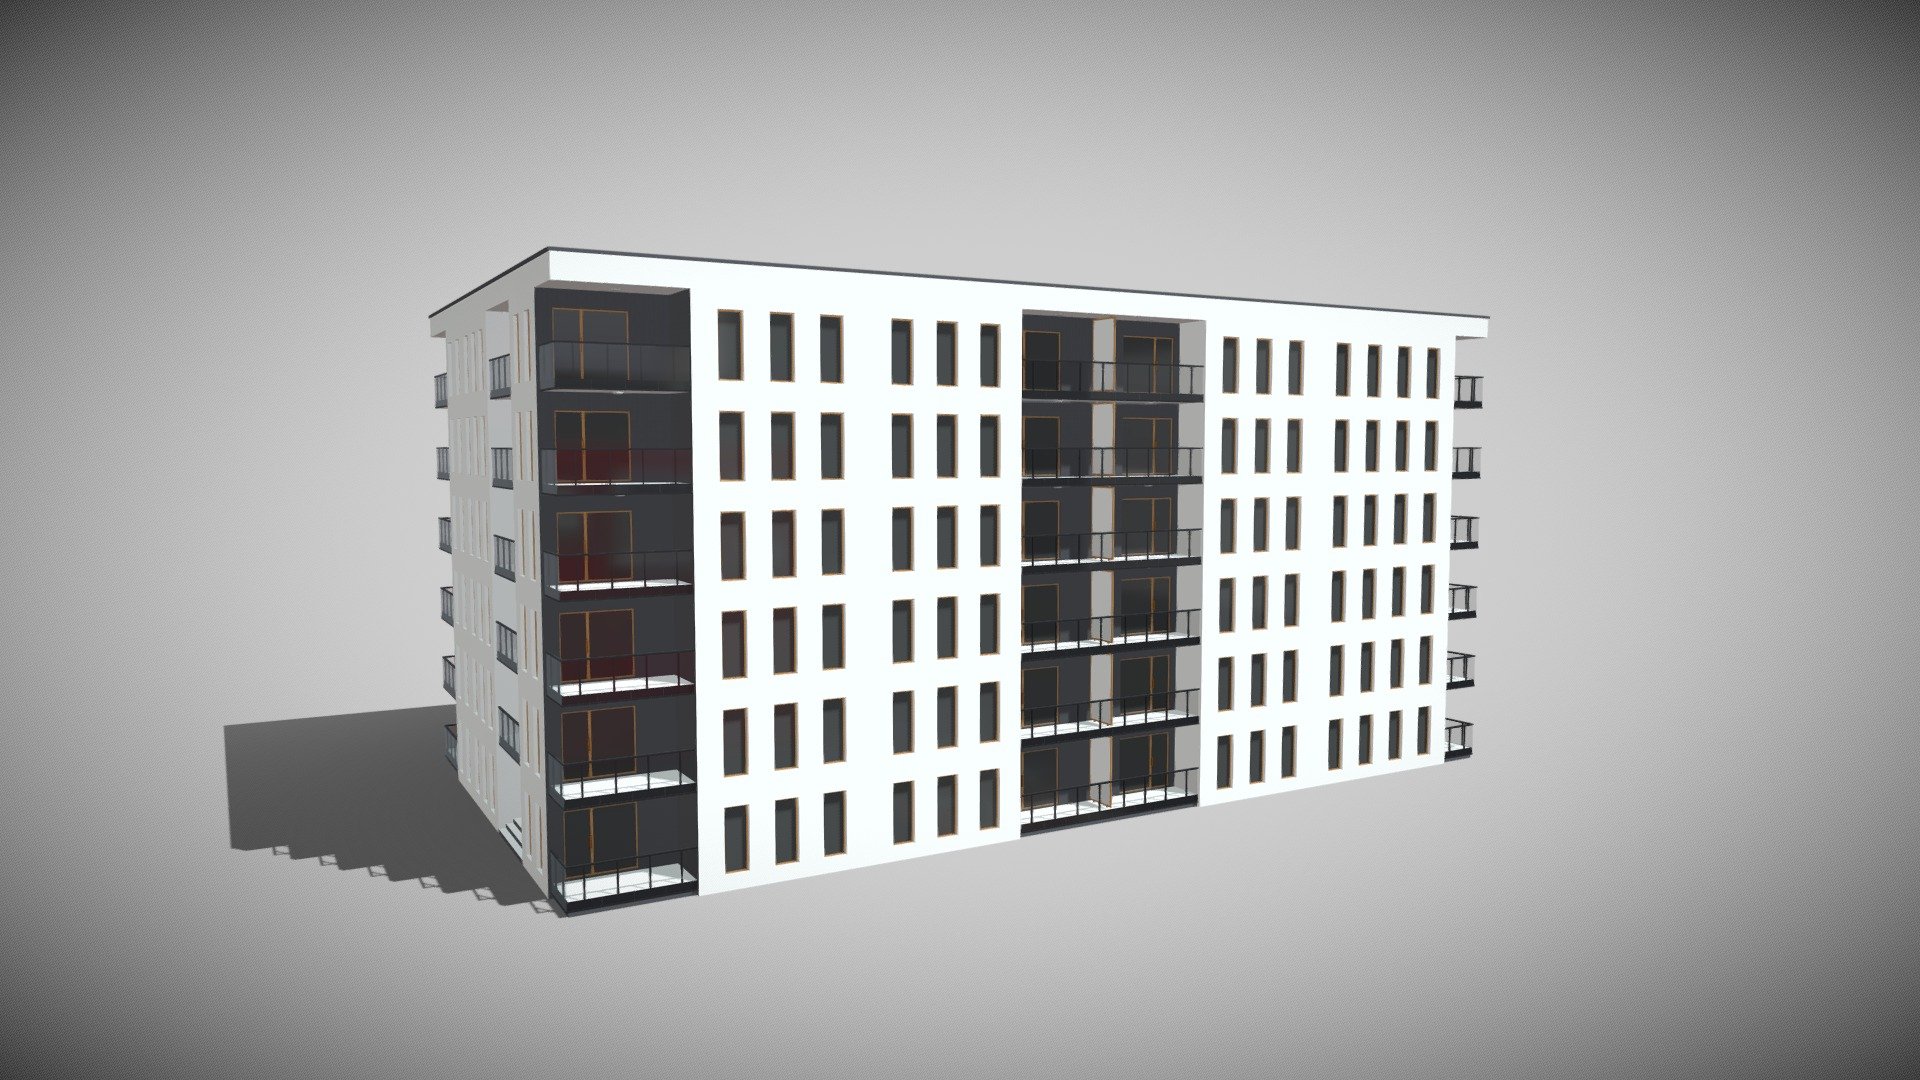 Detailed model of an Apartment Building with no interior, modeled in Cinema 4D.The model was created using approximate real world dimensions.

The model has 23,462 polys and 29,849 vertices.

An additional file has been provided containing the original Cinema 4D project files and other 3d export files such as 3ds, fbx and obj 3d model